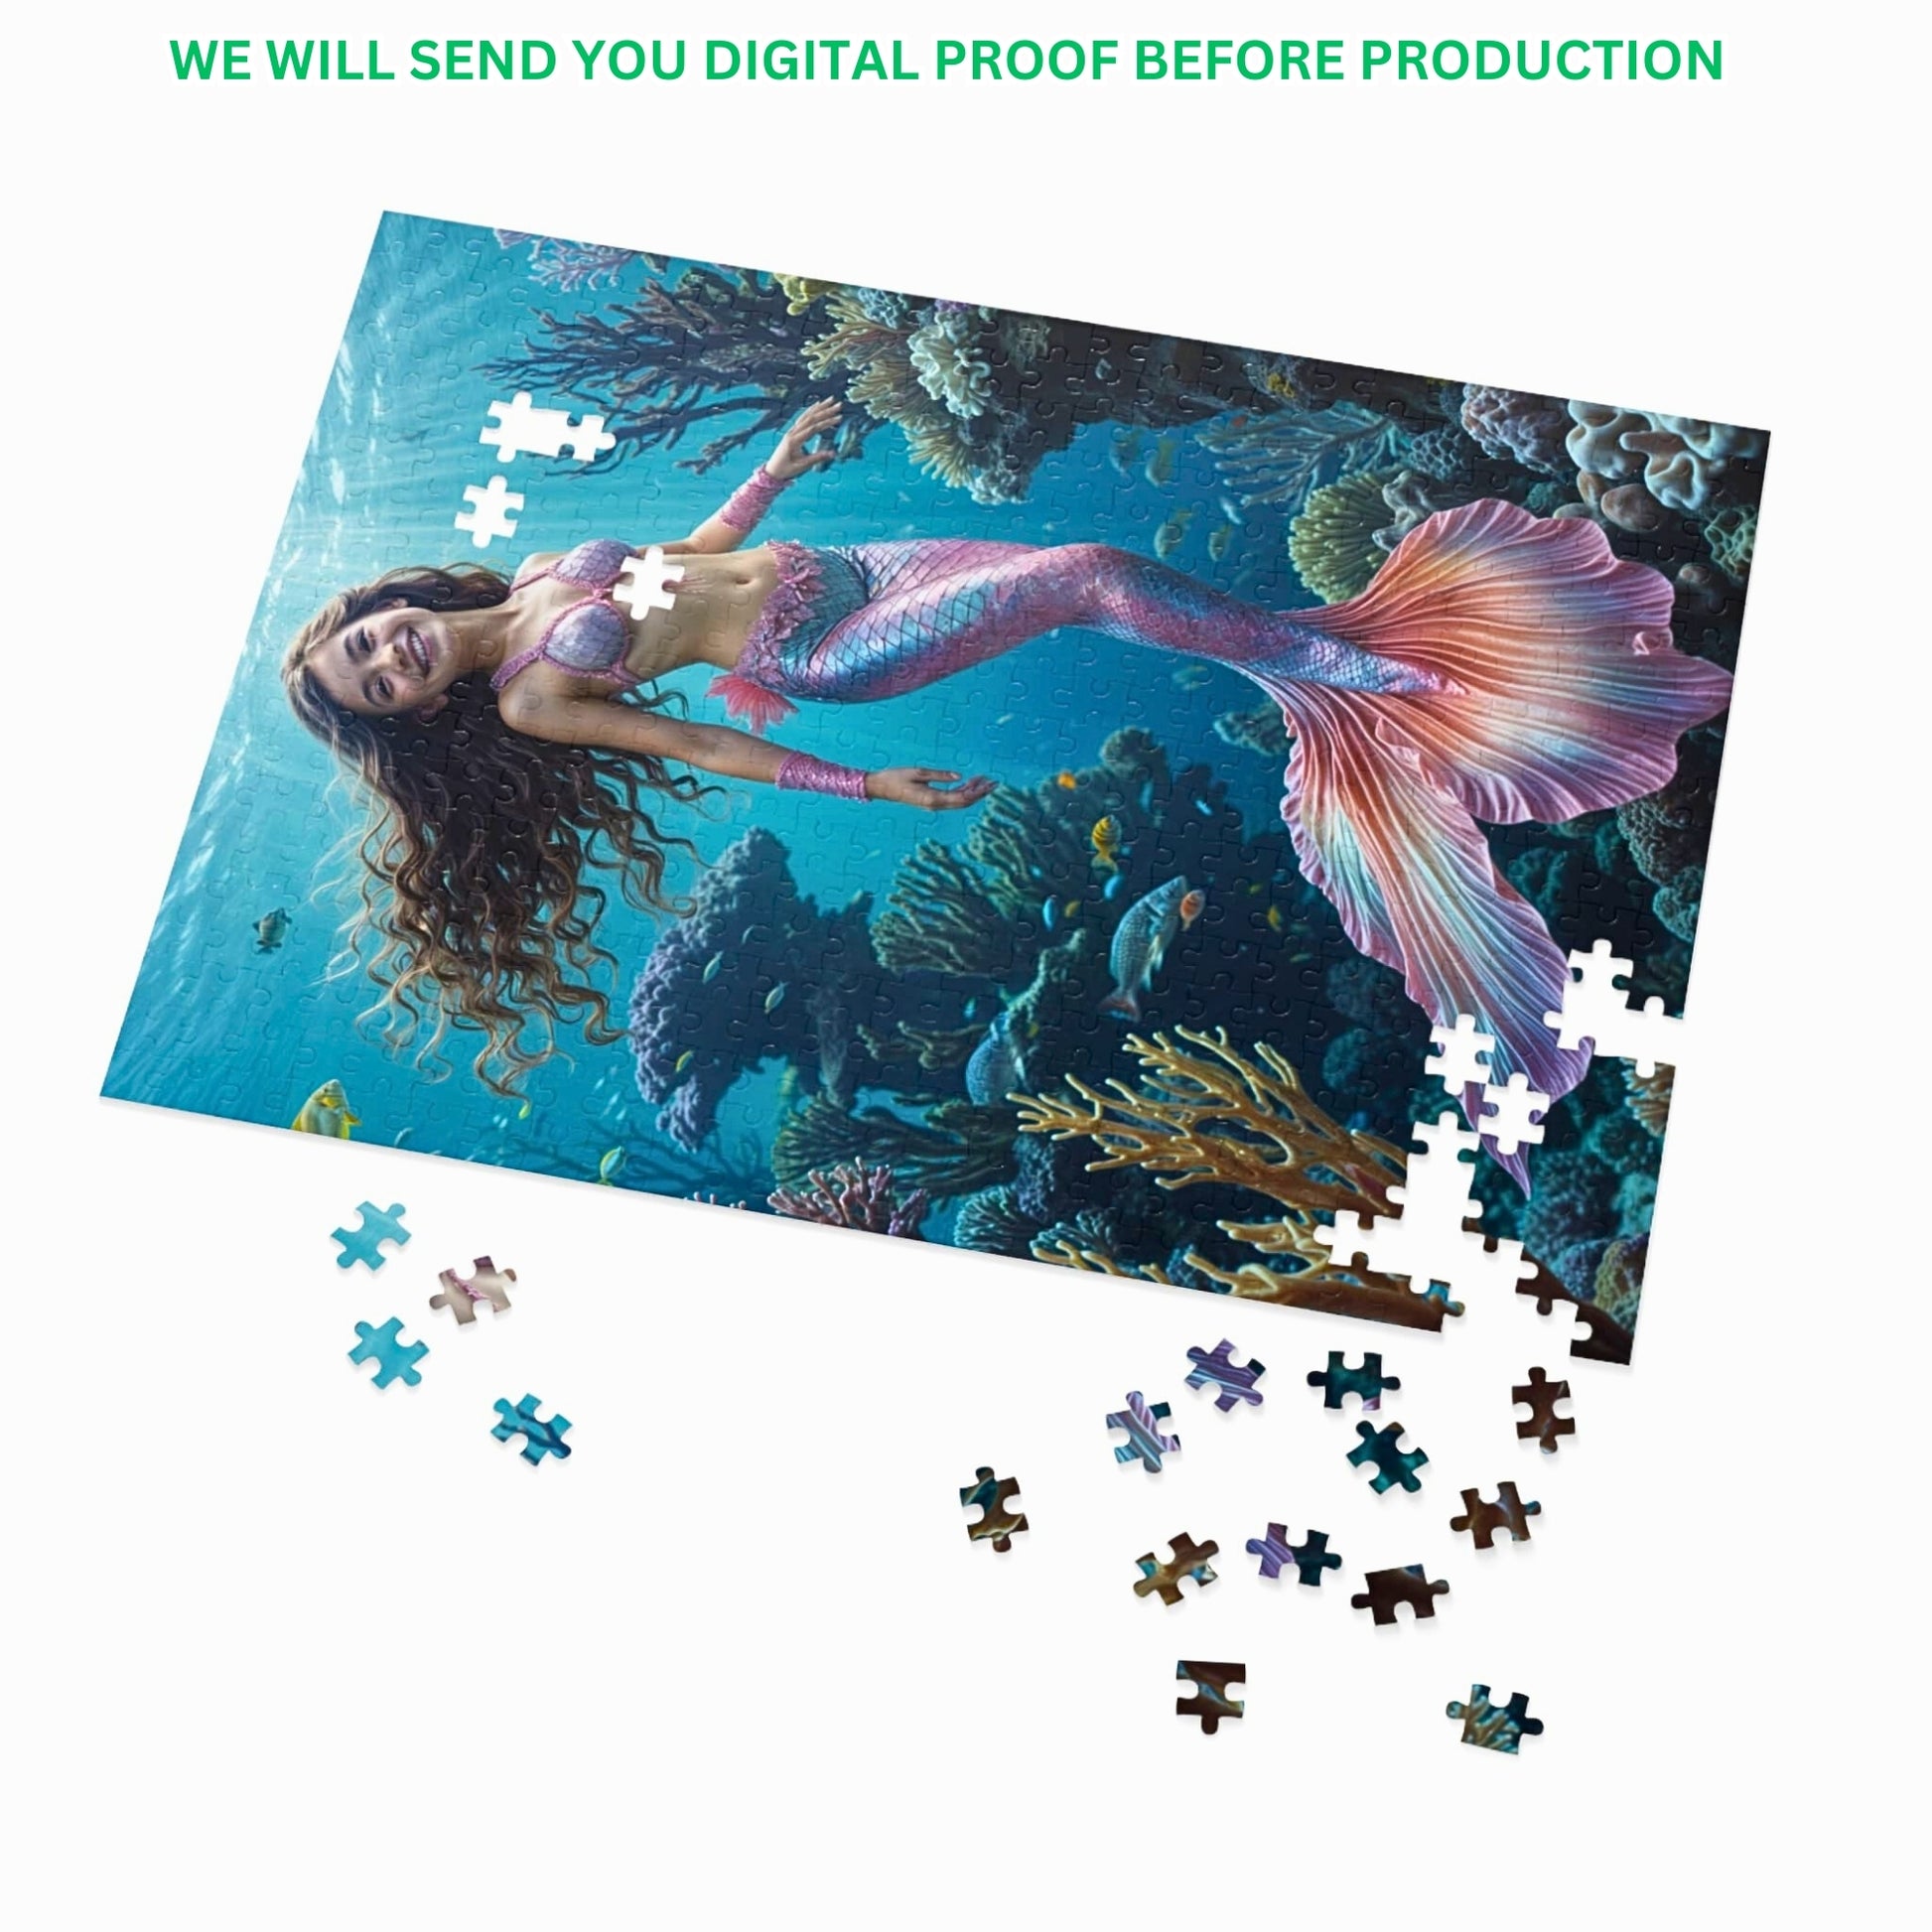 Transform photos into custom mermaid puzzles. Personalized little mermaid puzzle gifts. Create princess portraits. Ideal for princess birthdays. Choose 250-1000 pieces. Unique mermaid-themed gifts for girls.